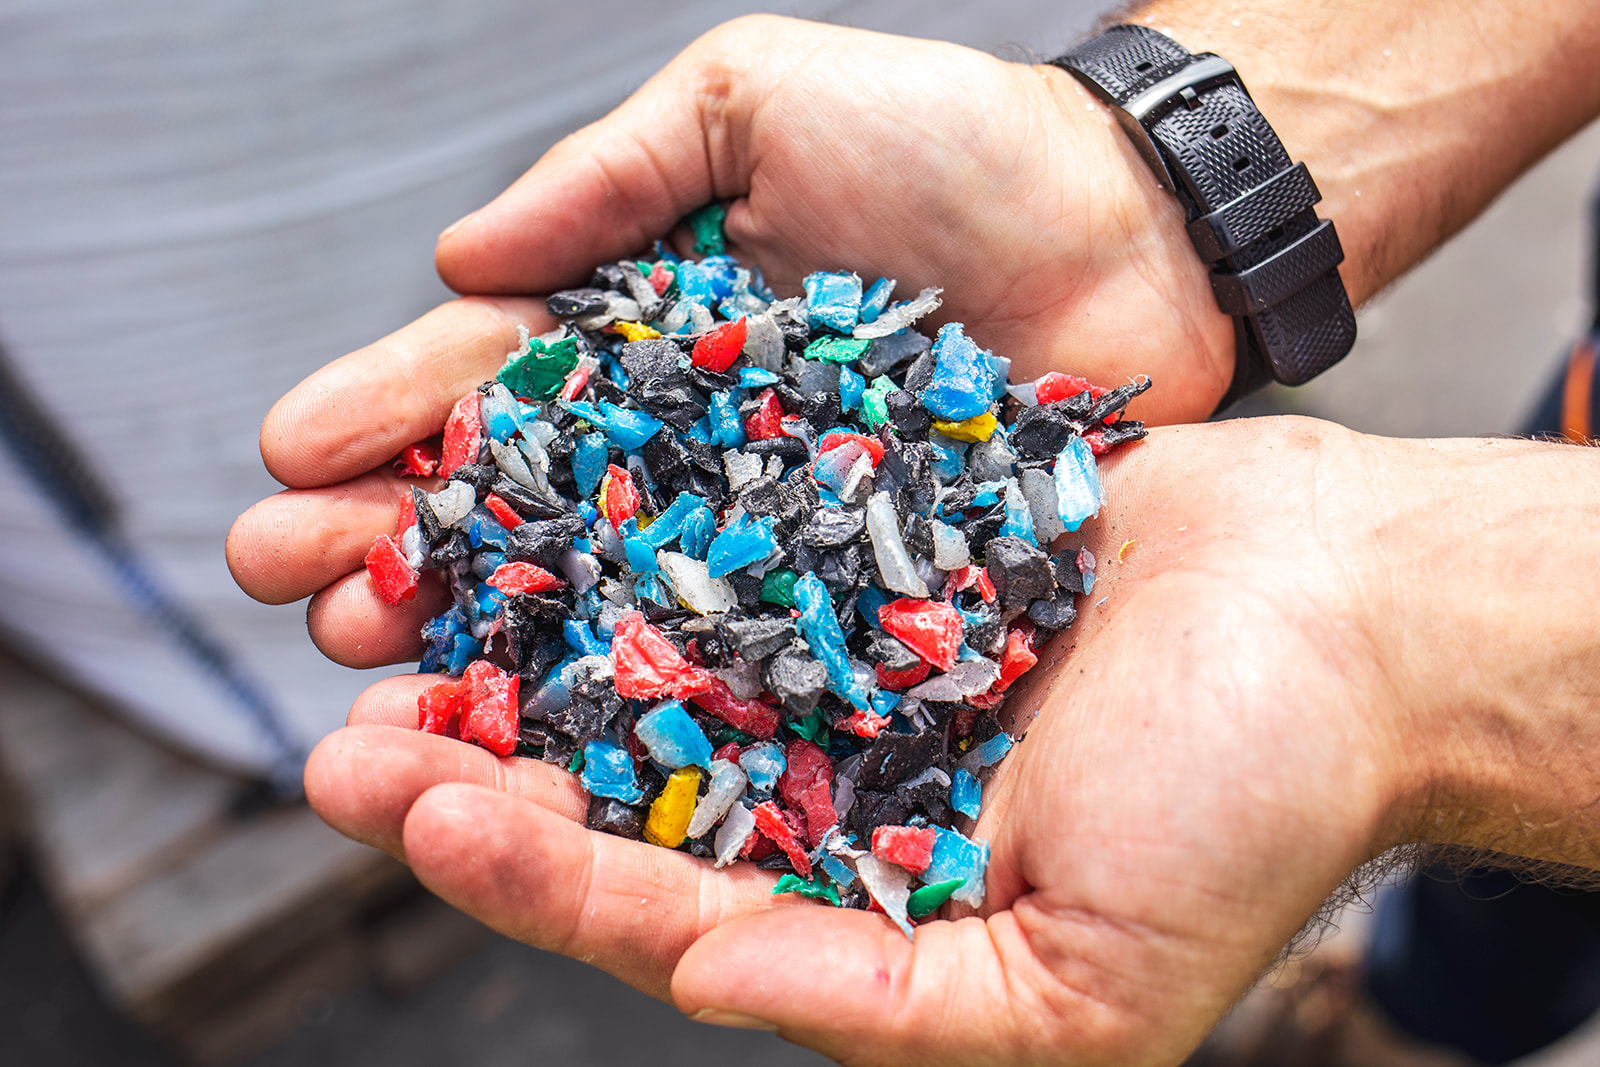 how-to-recycle-plastics-responsibly-advice-for-businesses